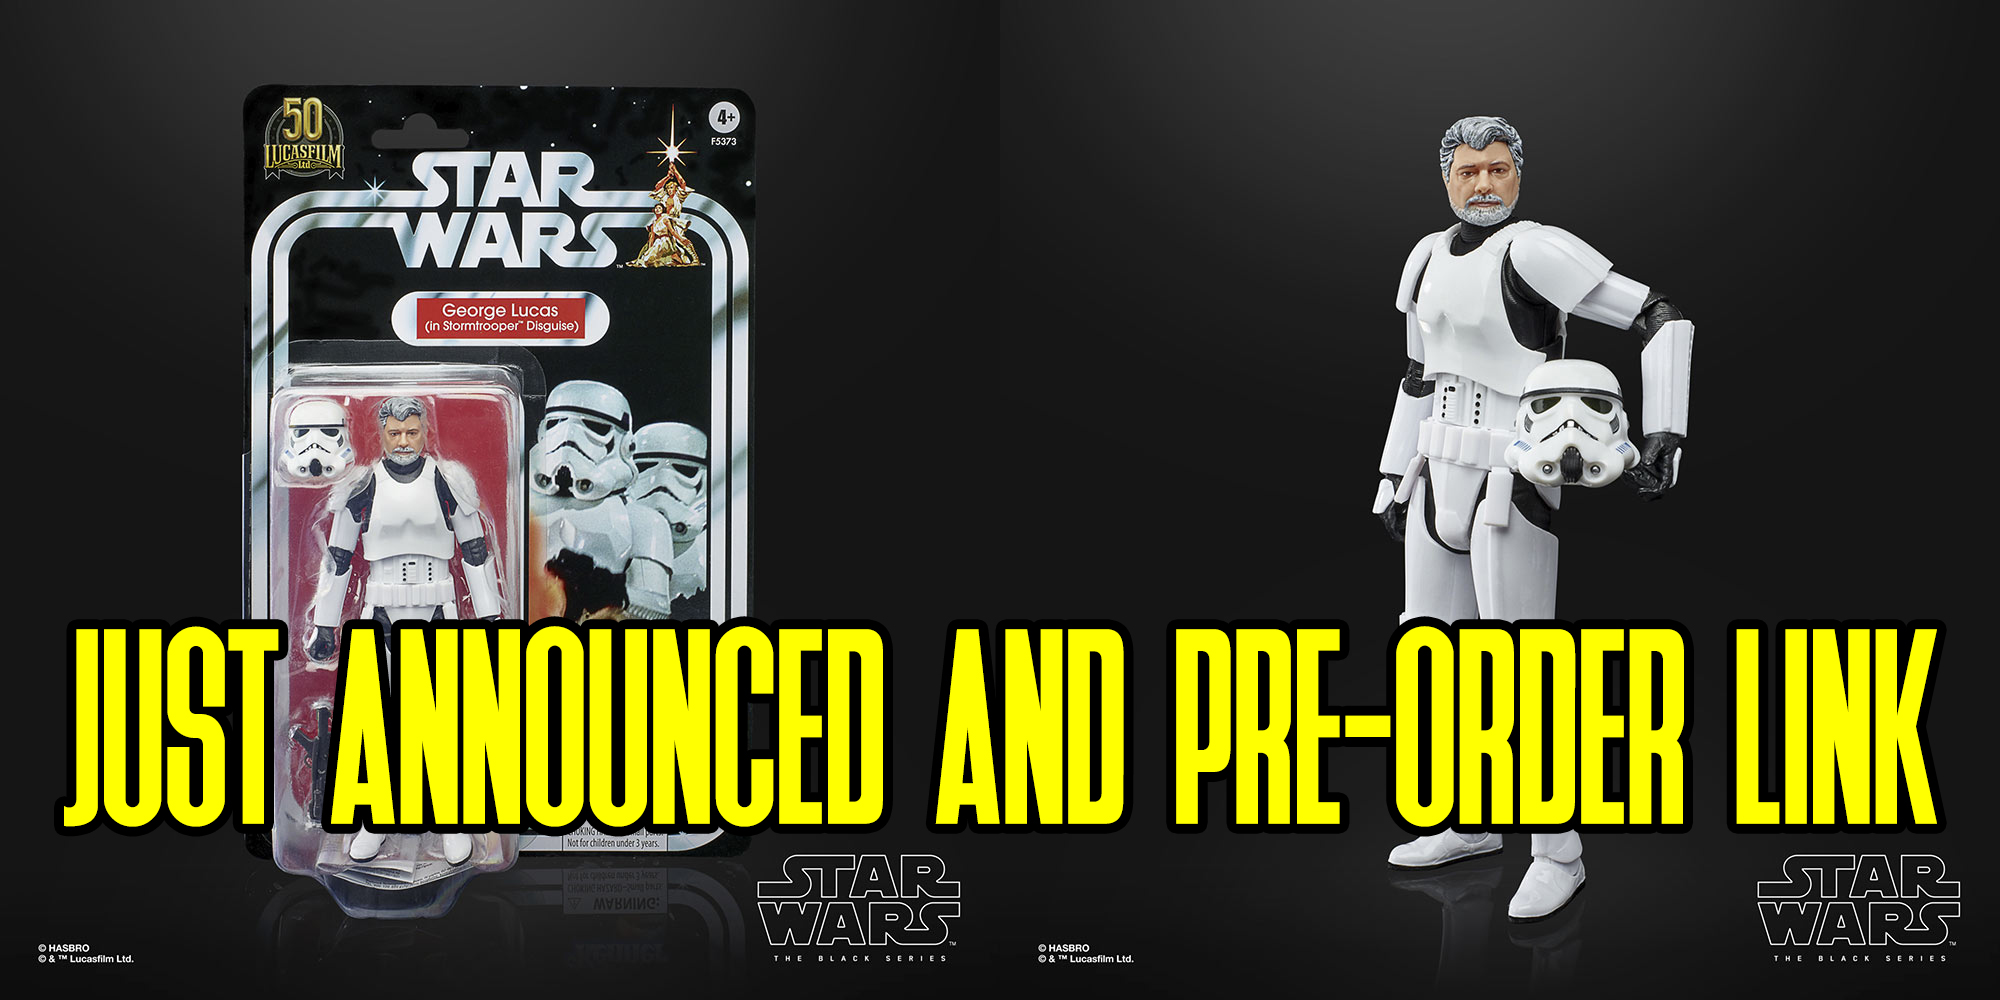 George Lucas Is Coming To The Black Series!